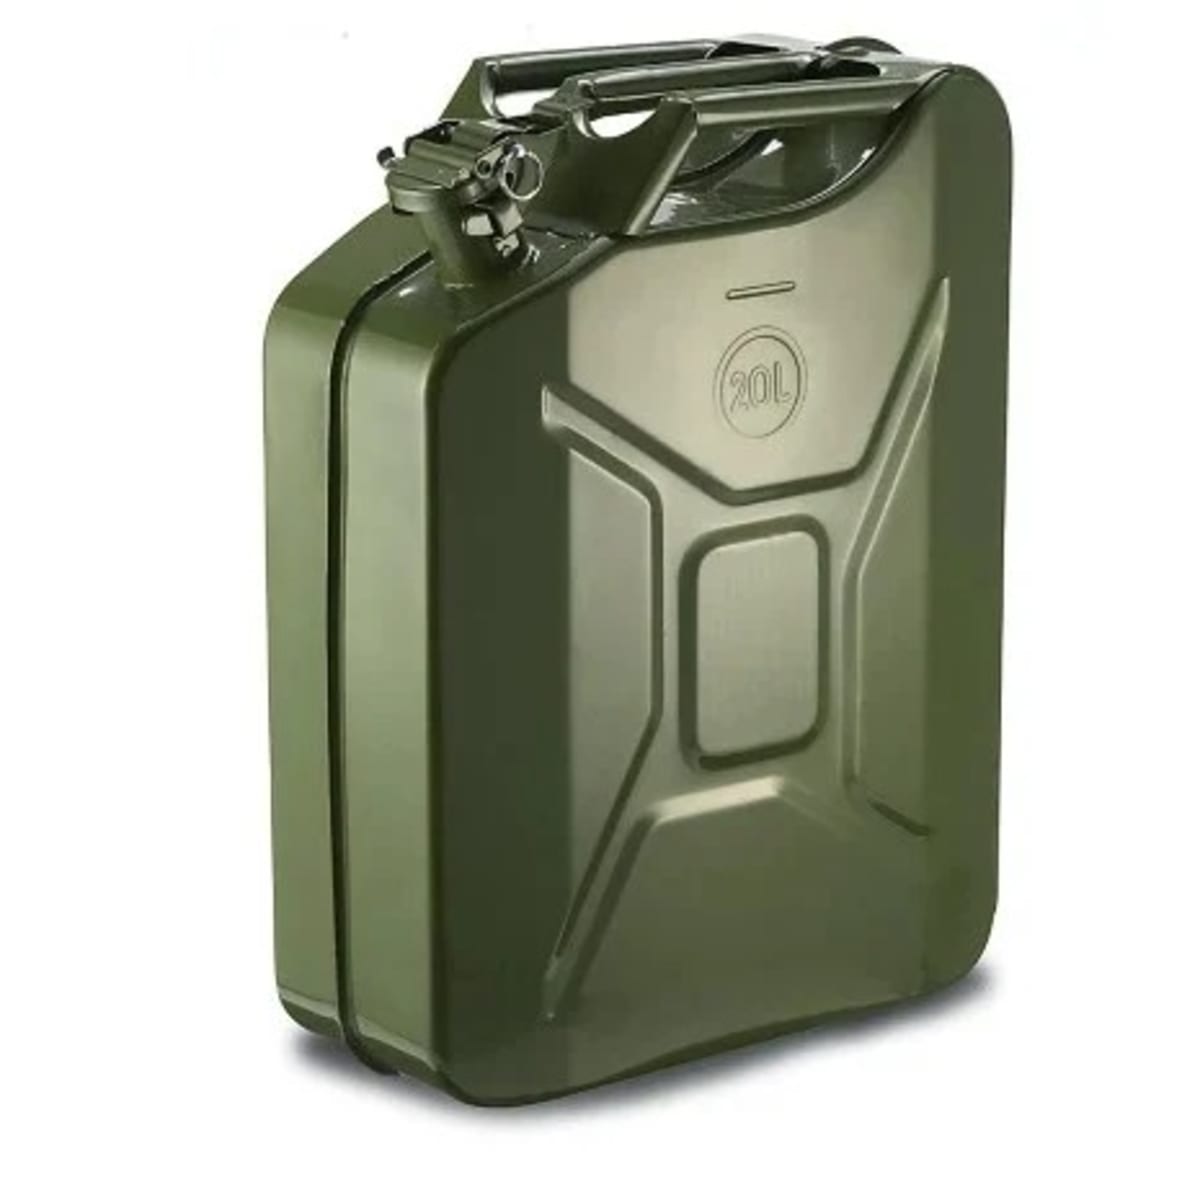 Military Style Petrol Fuel Can 20L